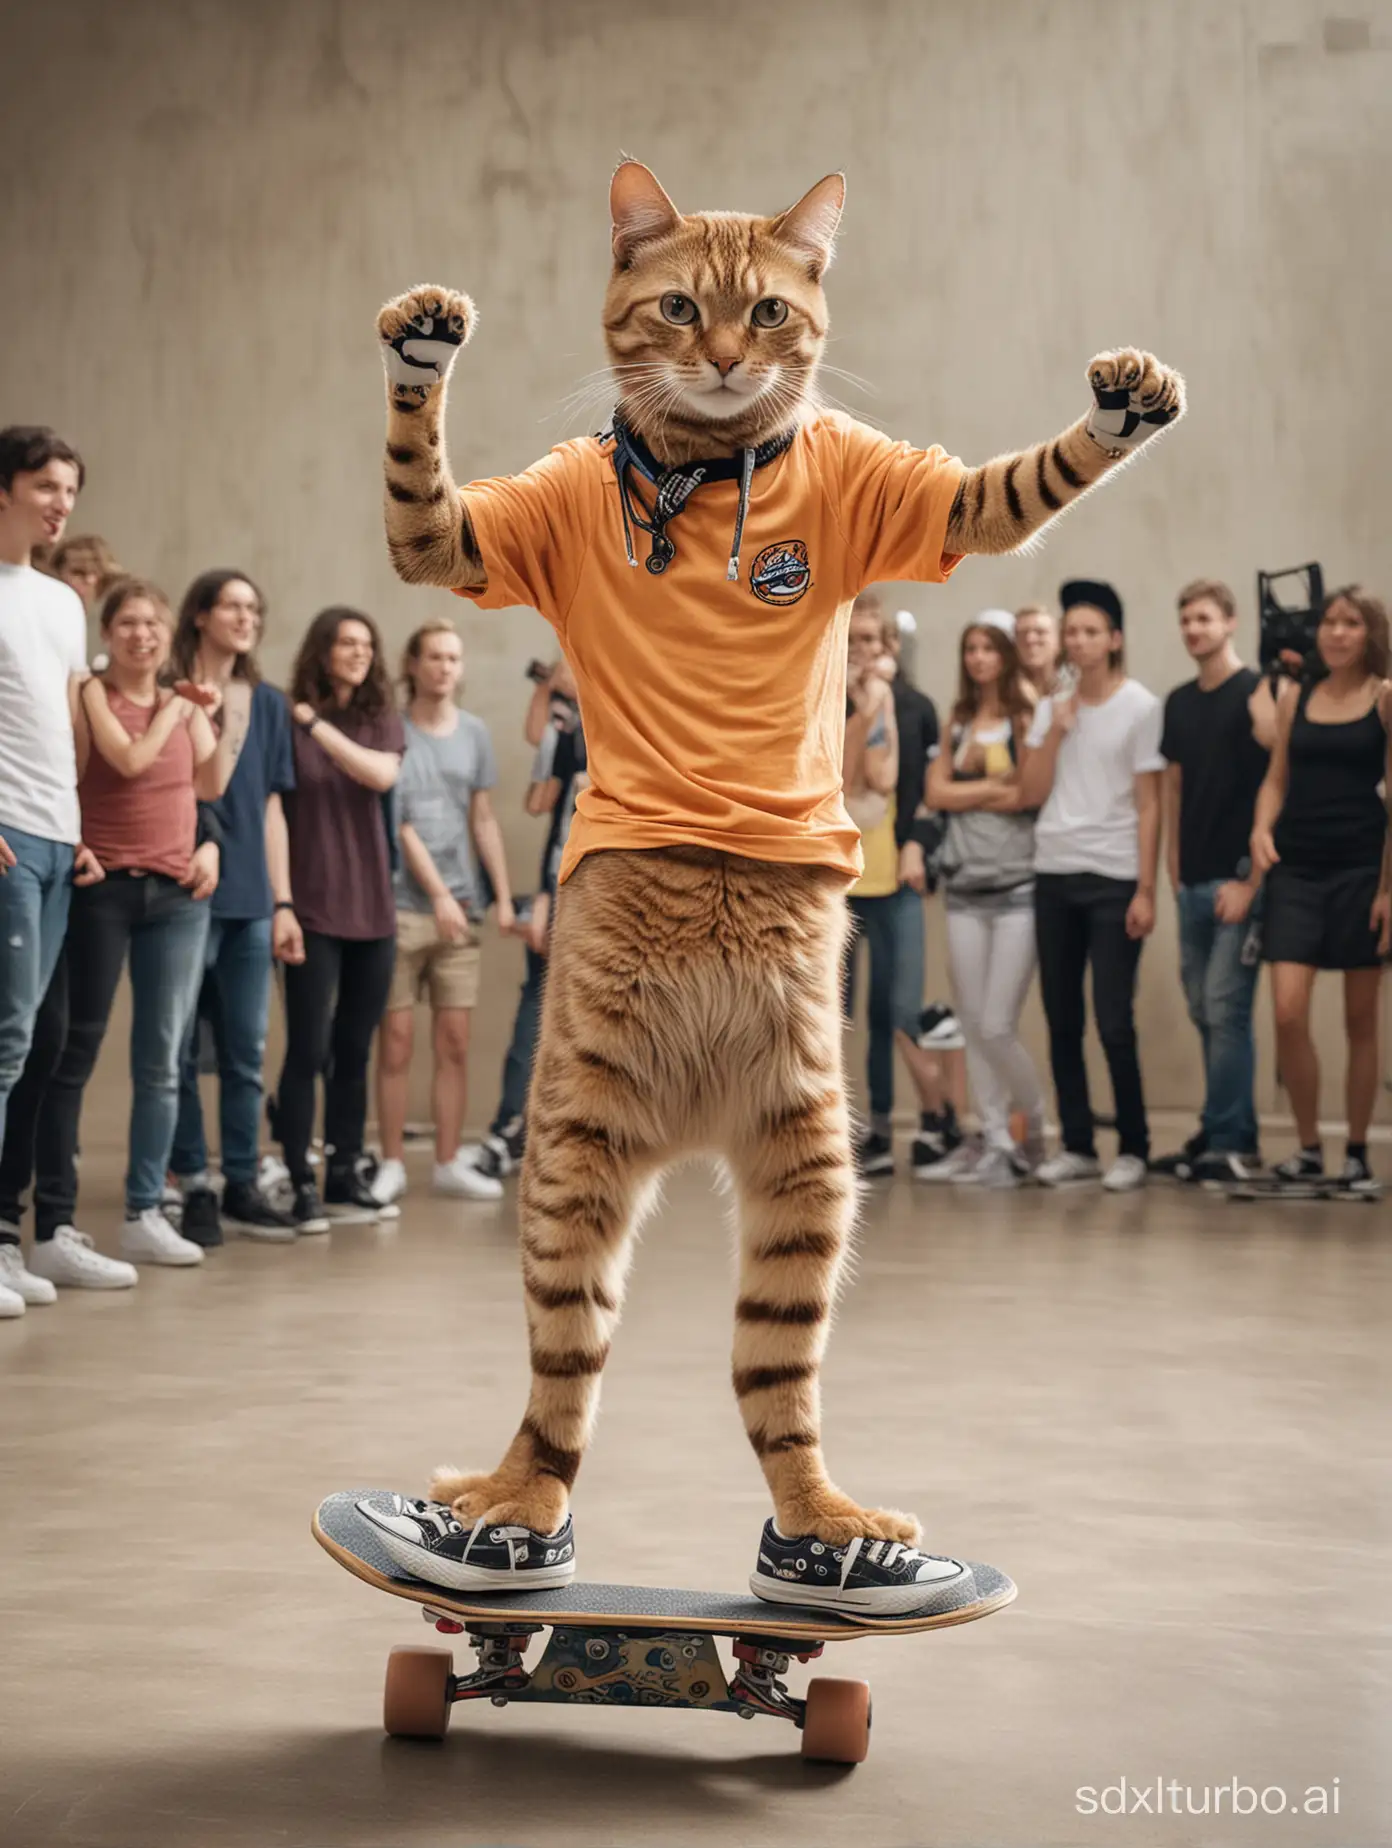 an anthropomorphic cat dressed as an athlete performing extreme tricks in a circle of skateboarders